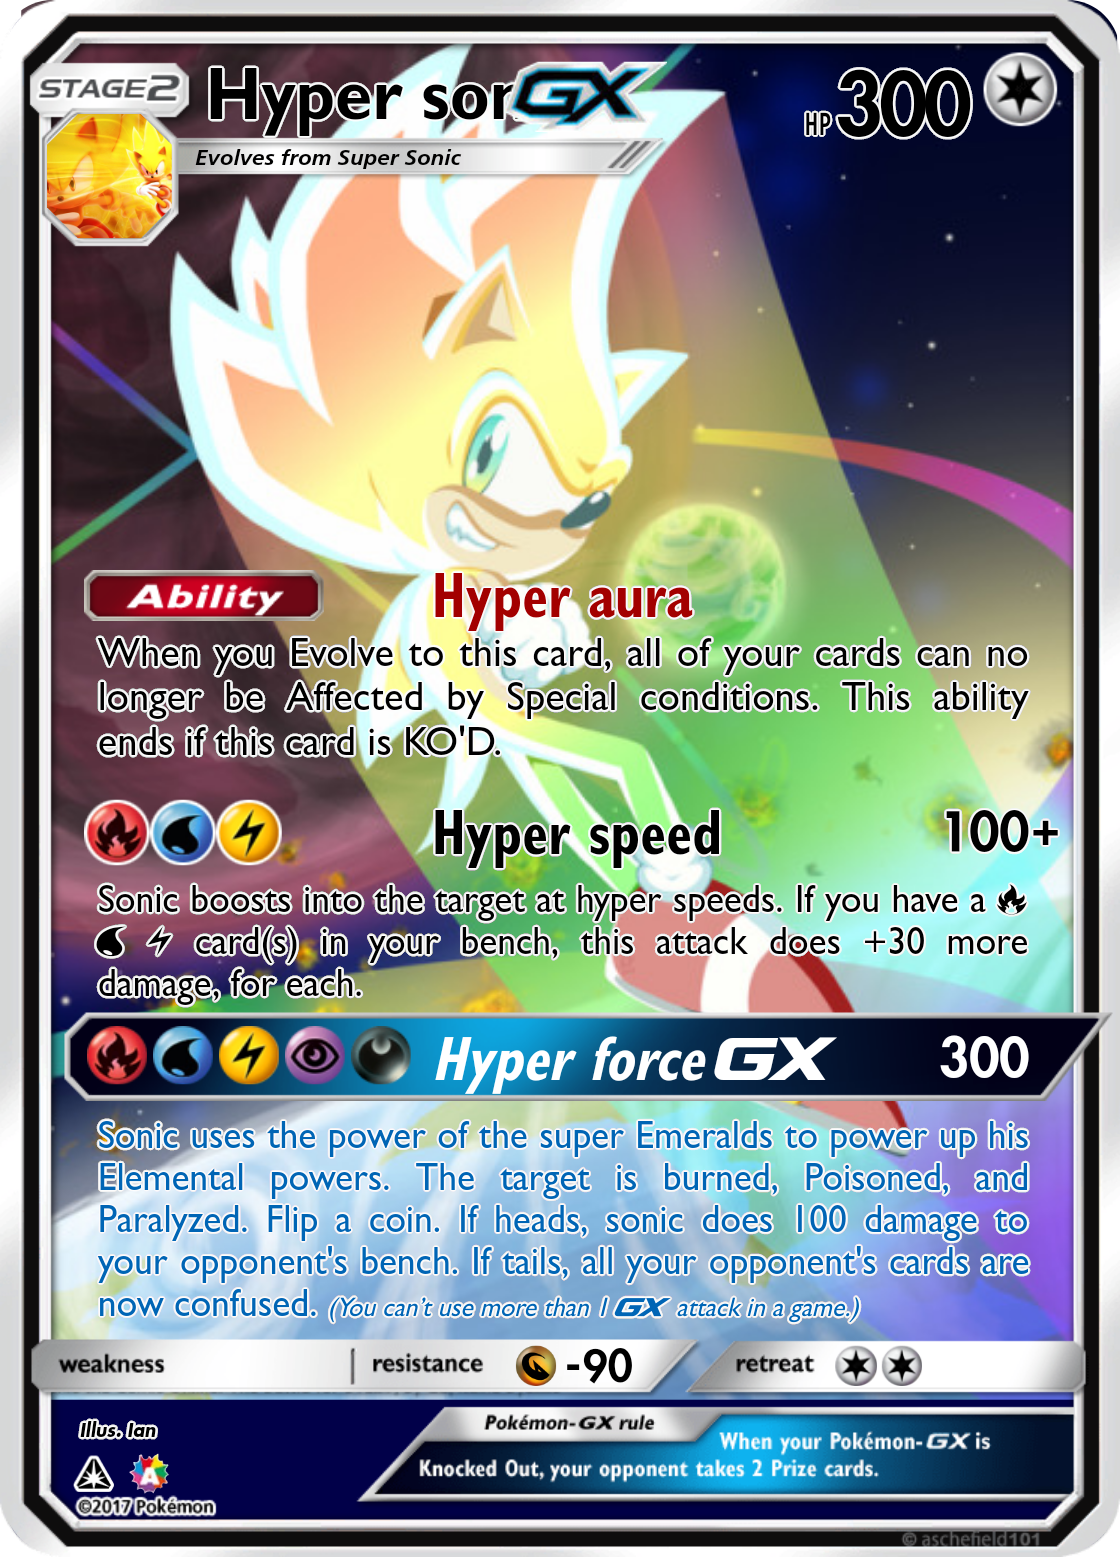 100+] Hyper Sonic Pictures